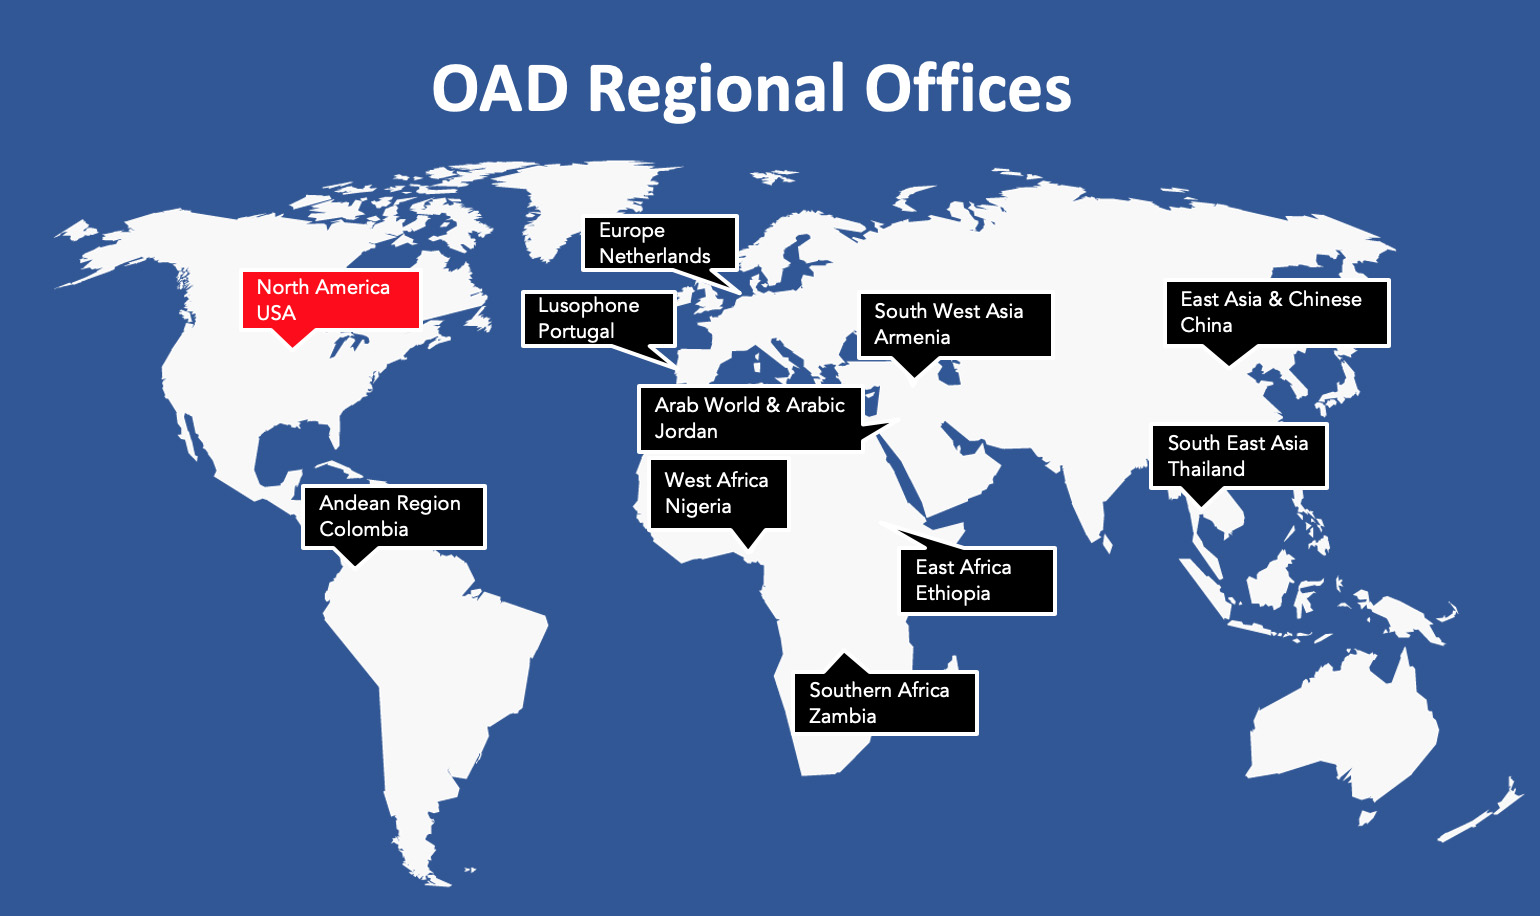 IAU Regional Offices of the OAD